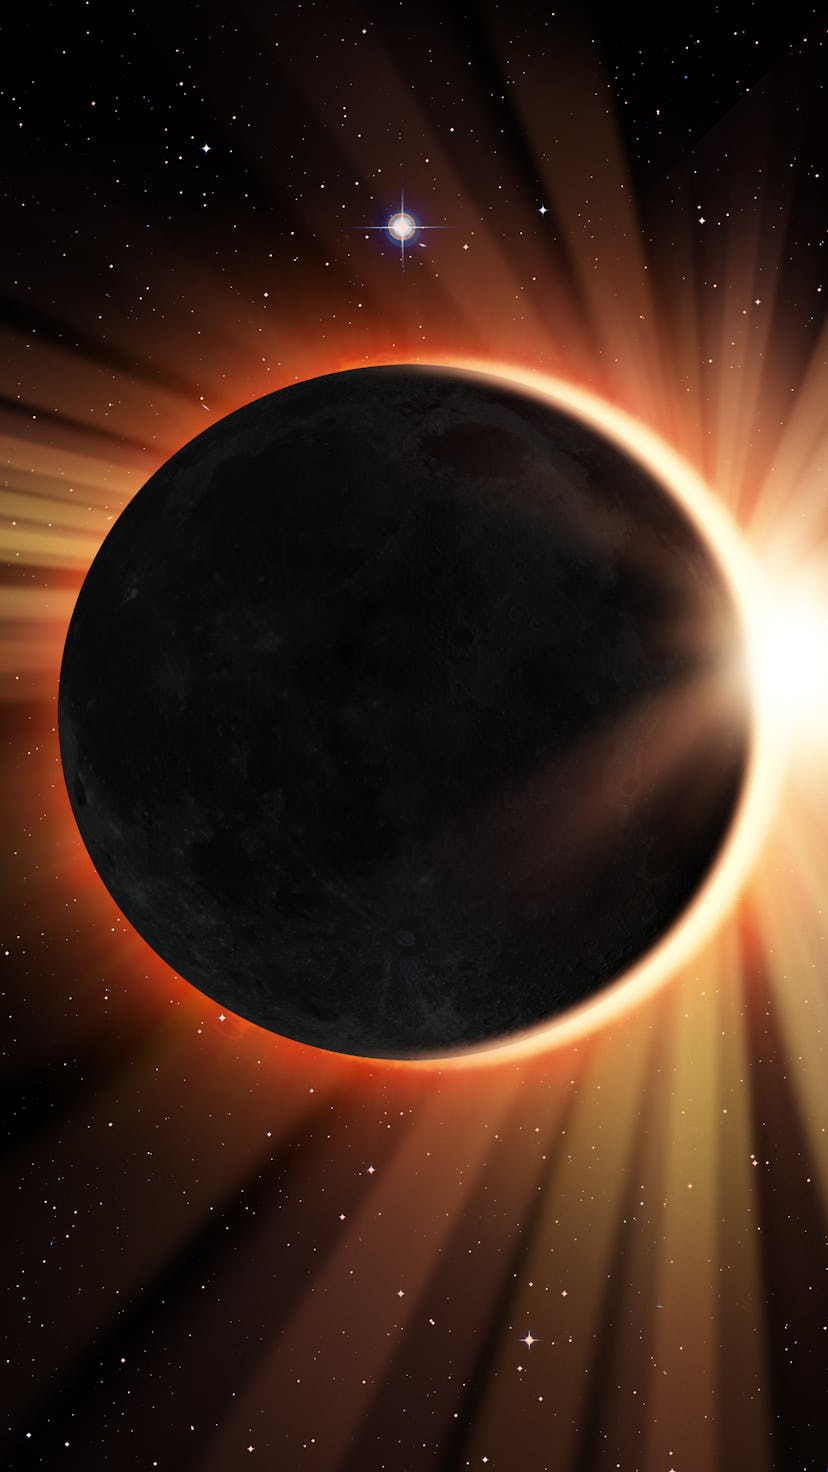 The June 2021 new moon eclipse forms a rare "ring of fire" in the sky.